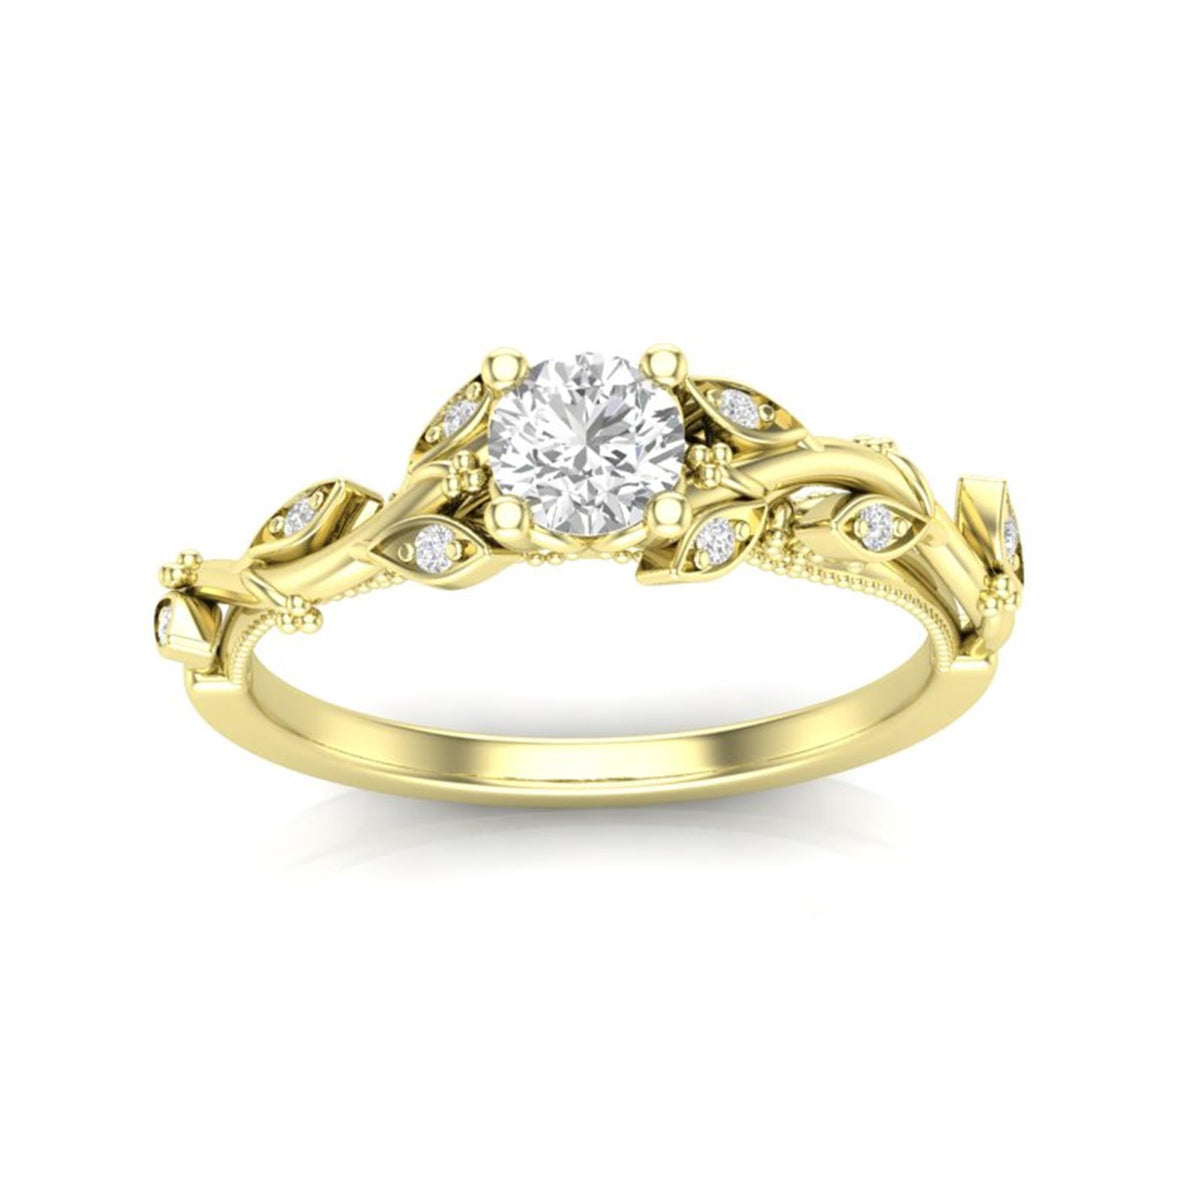 14Kt Yellow Gold Vintage Inspired Engagement Ring With 0.33ct Natural Center Diamond